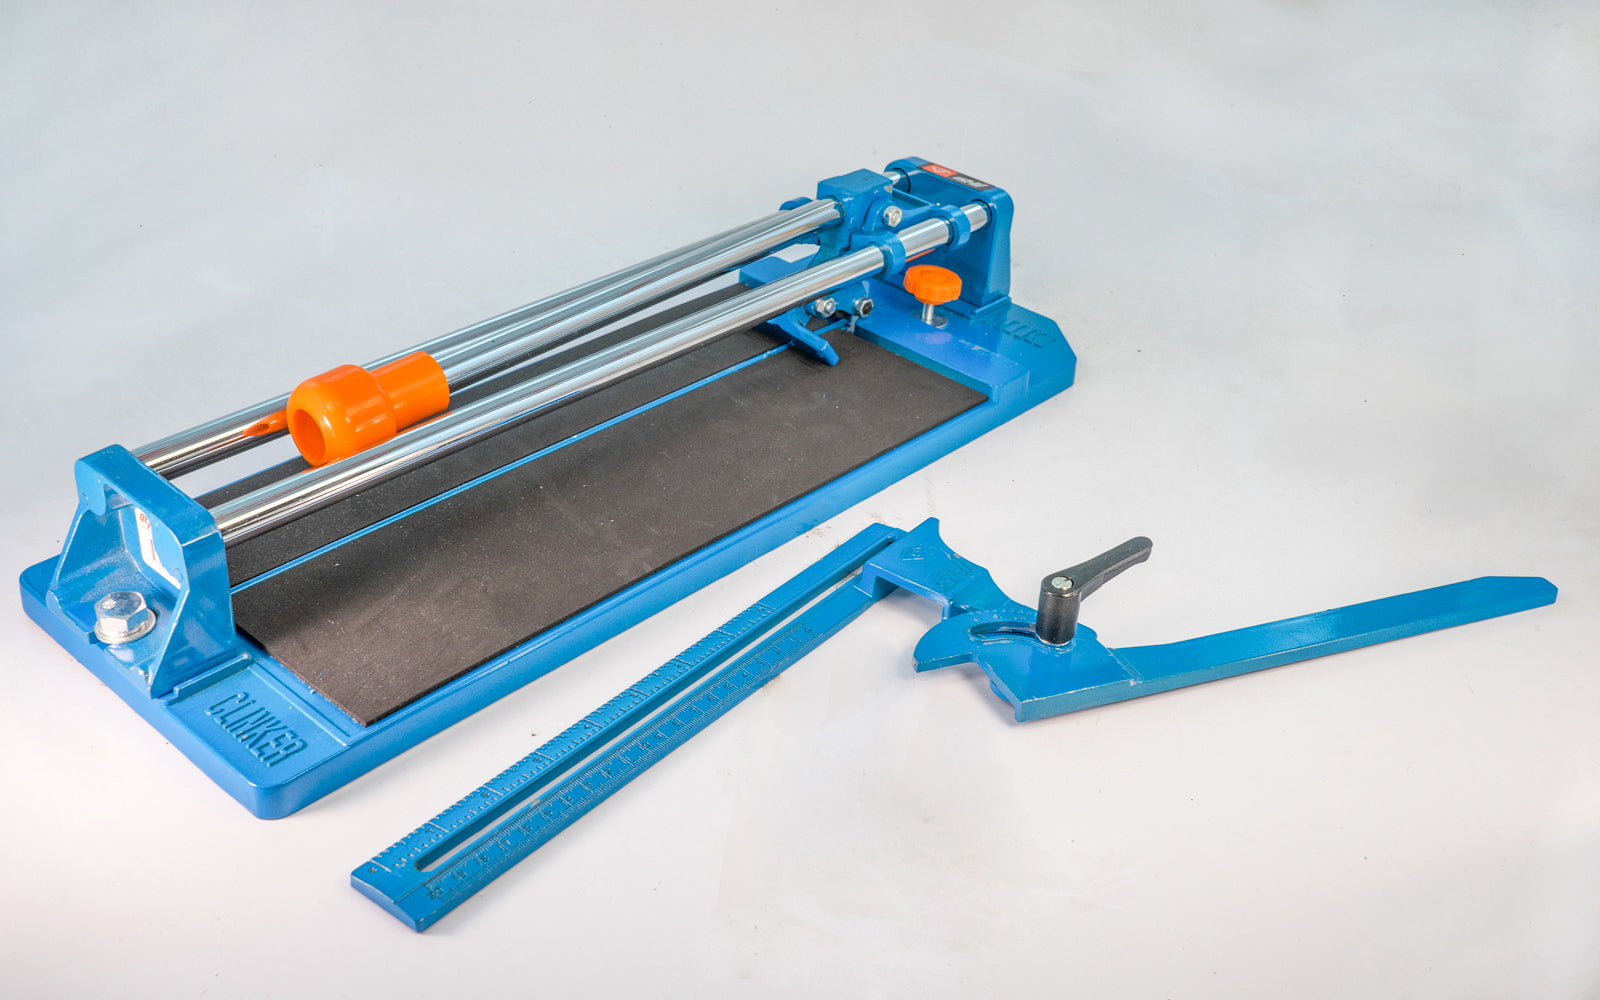 Marshalltown "Super Clinker" Tile Cutter - M14T. Cuts up to 13" tile & up to 8" tile diagonally. Angle gauge that allows any cut from square to 60 degrees. 035965053754.